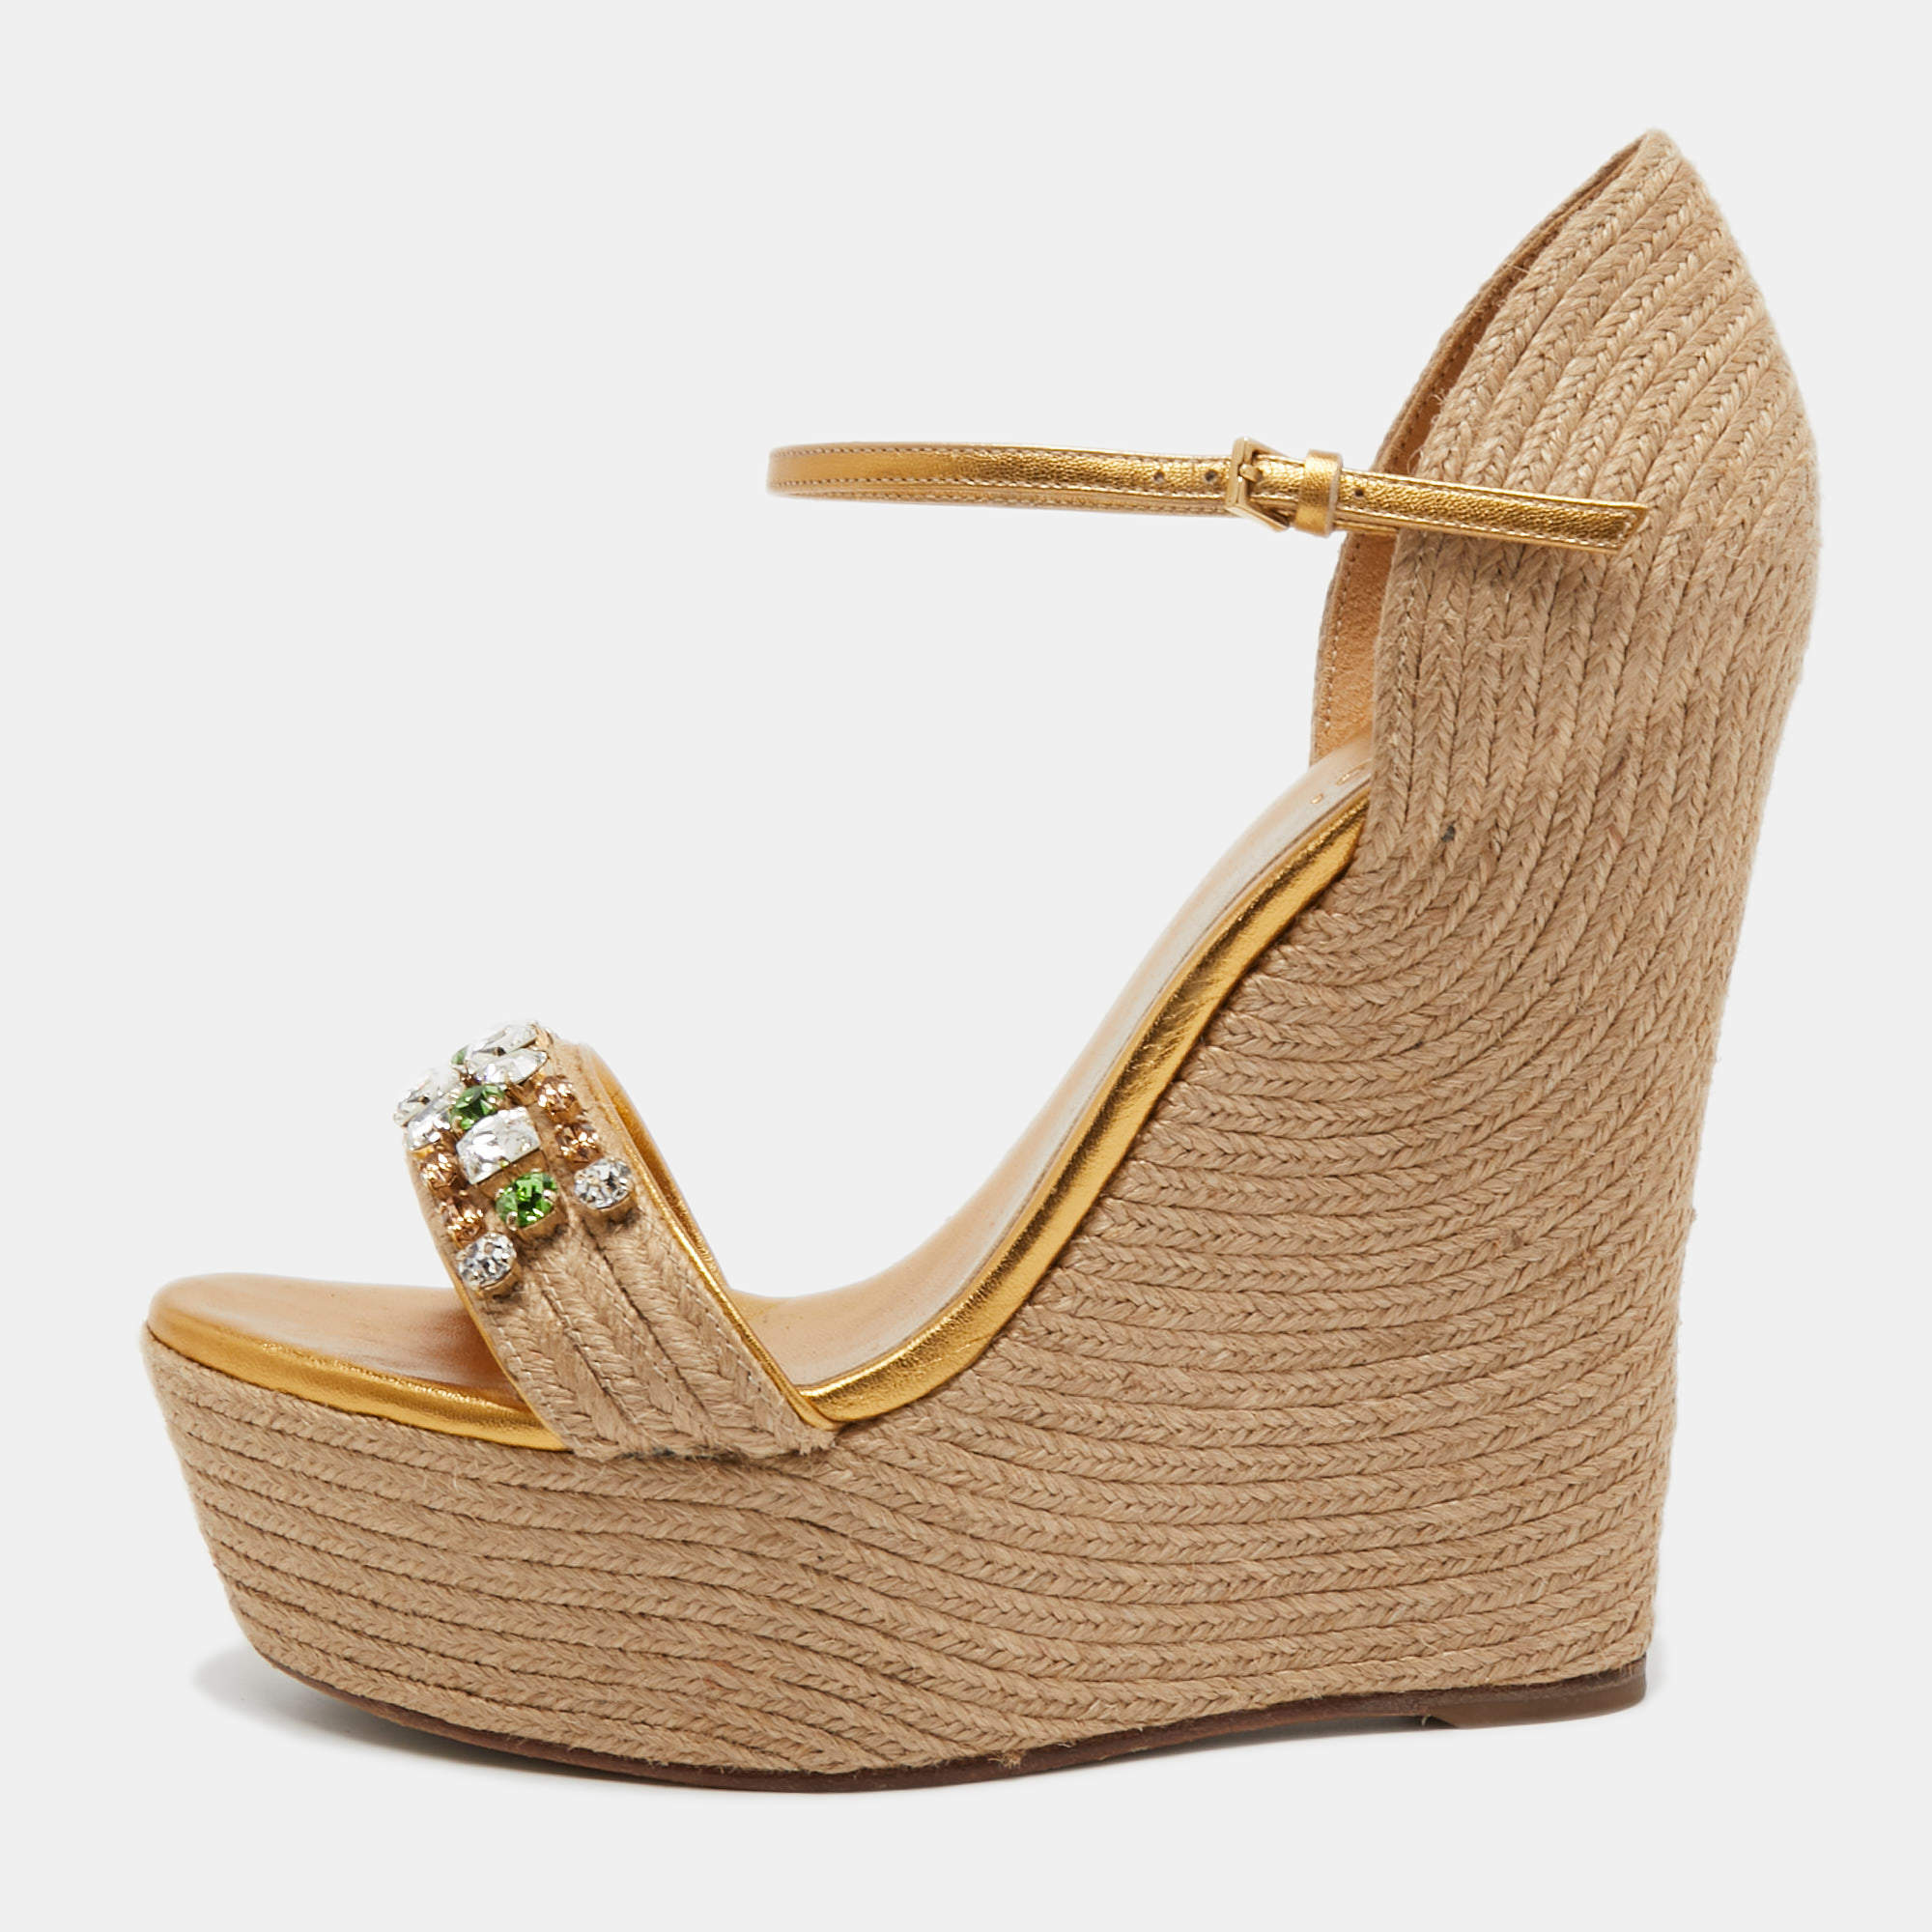 Gucci Beige/Gold Jute and Leather Crystal Embellished Espadrille Wedge Sandals Size 39